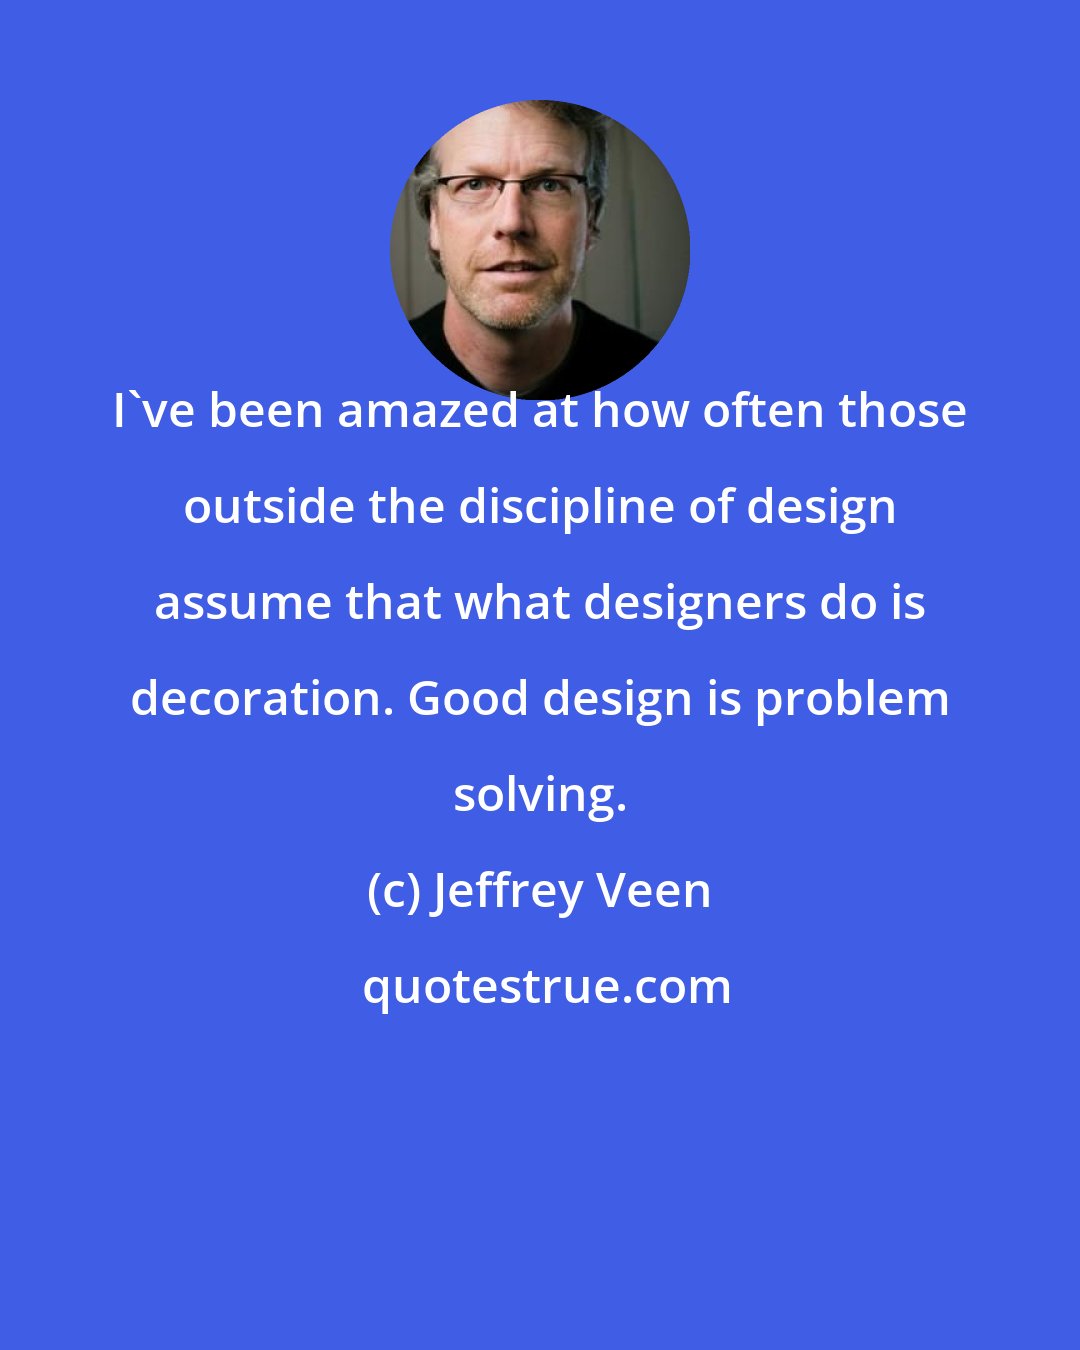 Jeffrey Veen: I've been amazed at how often those outside the discipline of design assume that what designers do is decoration. Good design is problem solving.